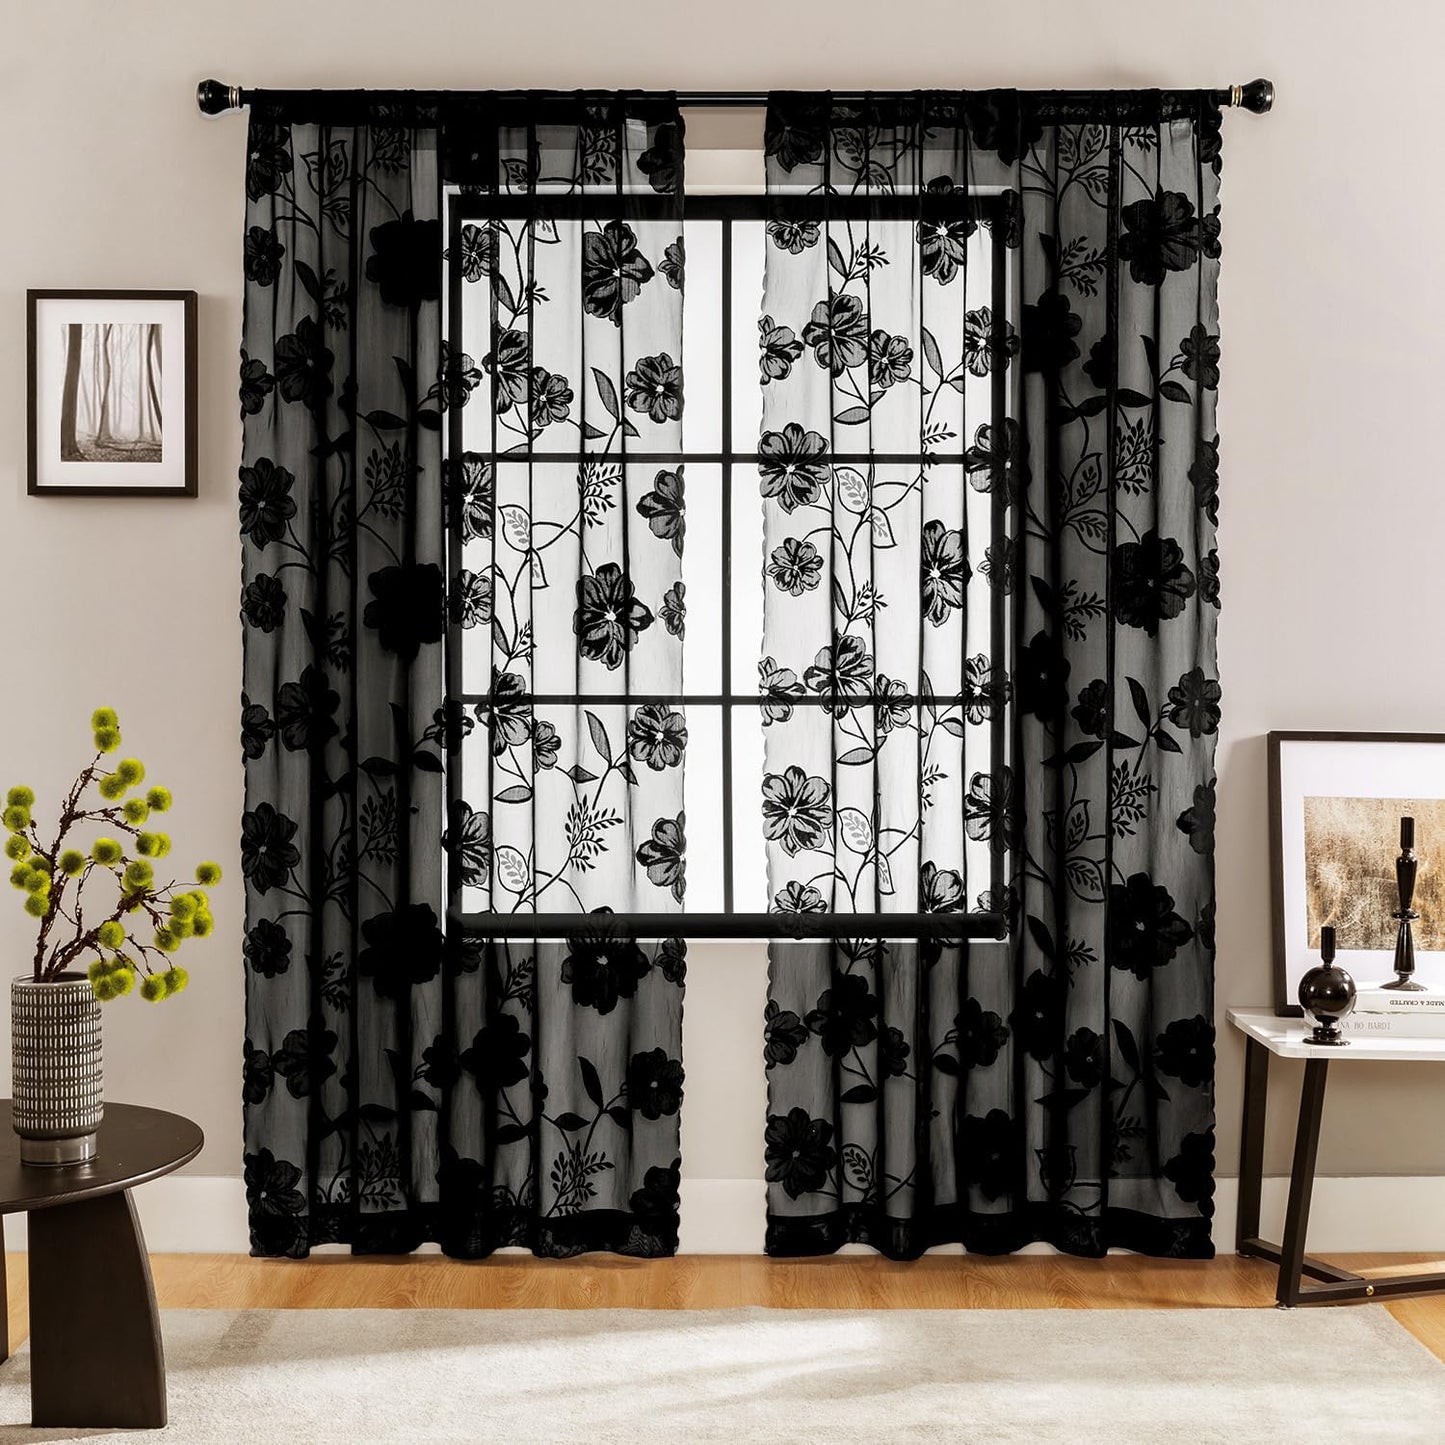 Treatmentex Black Sheer Lace Curtains for Bedroom Living Room Studio 84Inch Long Vintage Rose Floral Embroidered Semi Sheer Curtain Panels Privacy Leaf Sheer Drapes with Scalloped Edge 54" W 2Pcs 7Ft  Treatmentex   